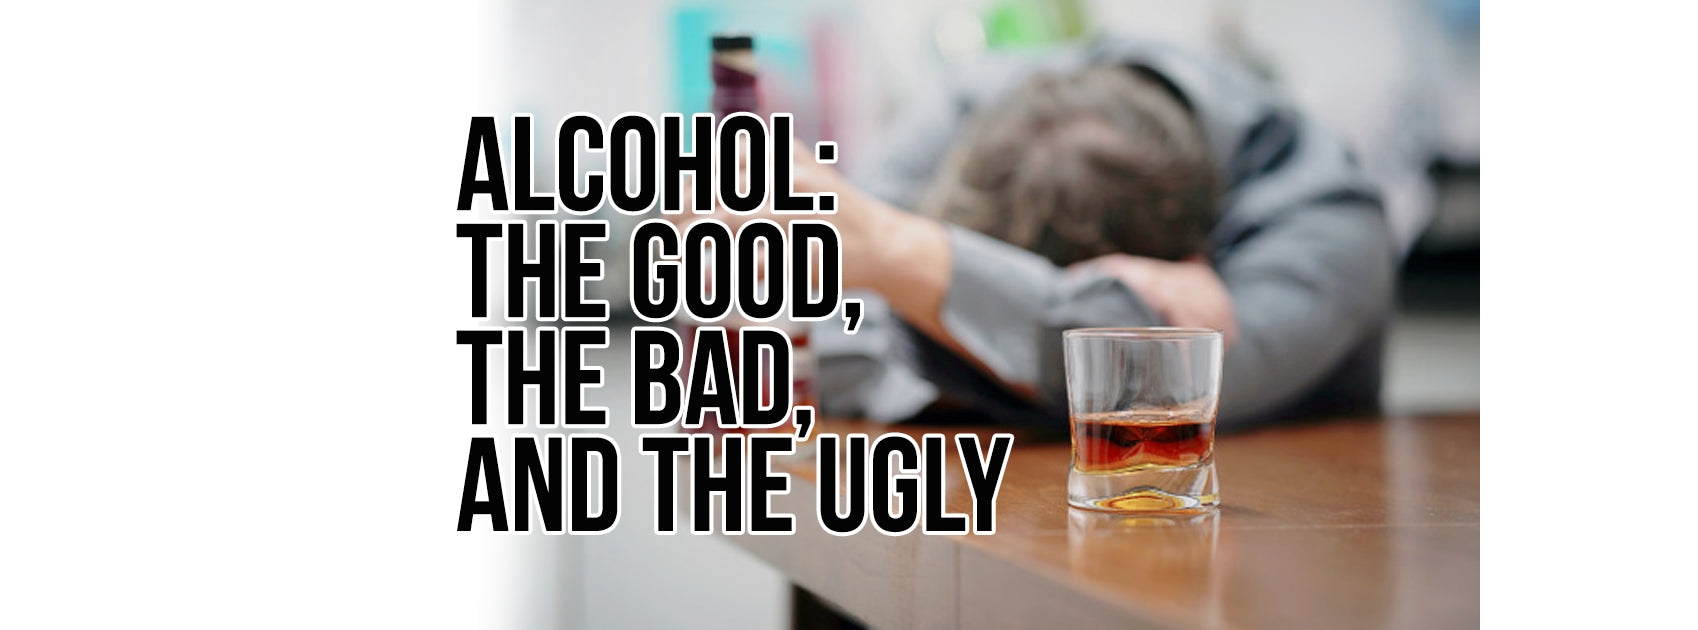 ALCOHOL: THE GOOD, THE BAD, AND THE UGLY